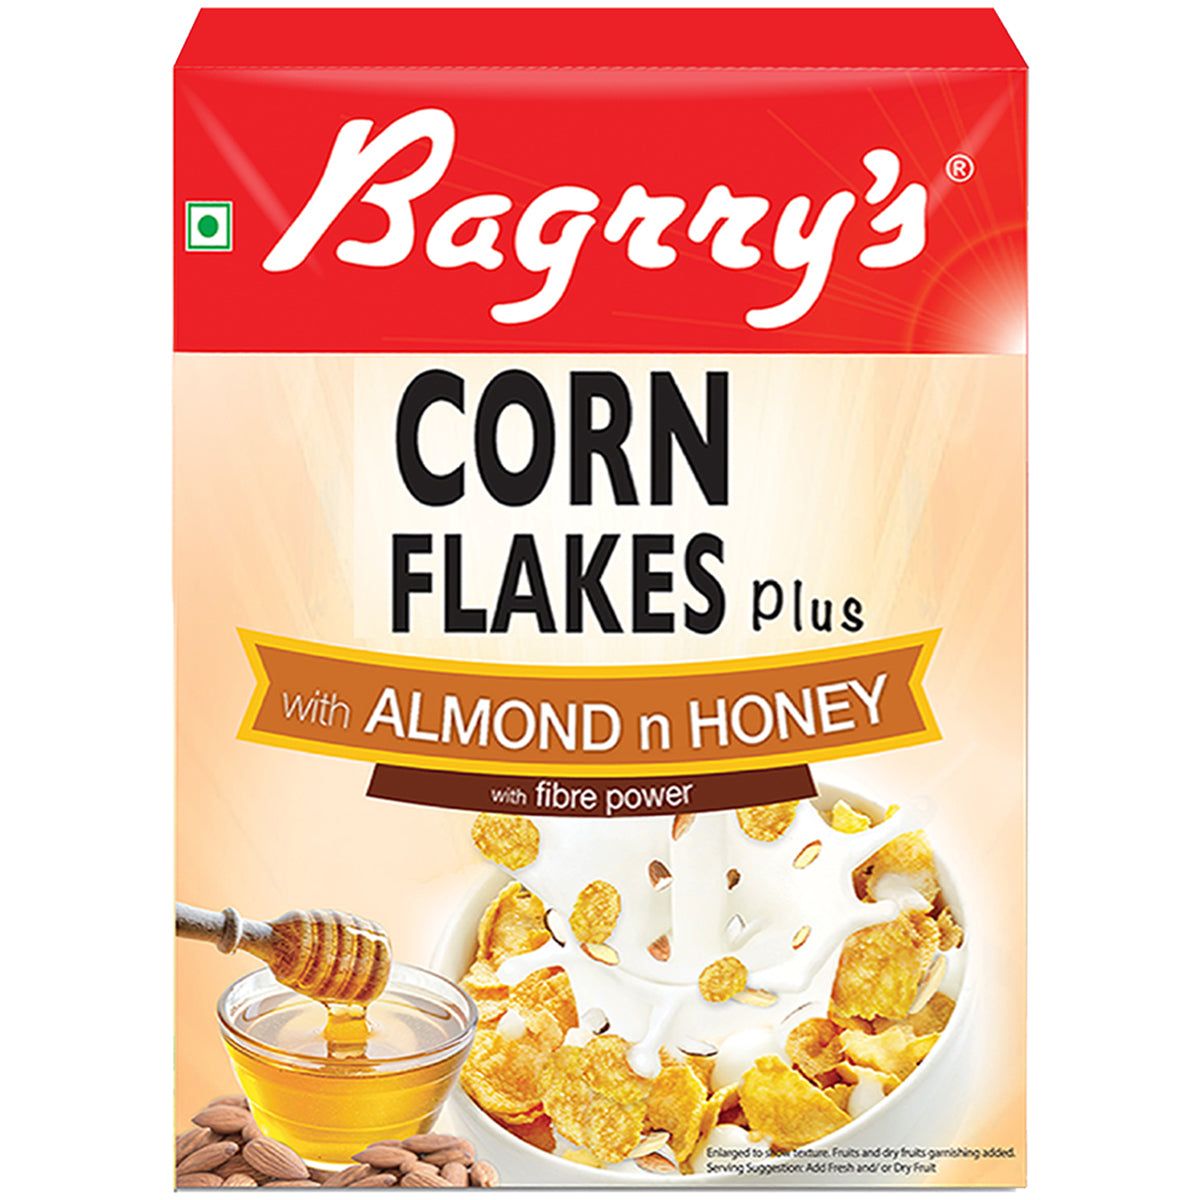 Bagrry's Corn Flakes Plus With Almond And Honey Image